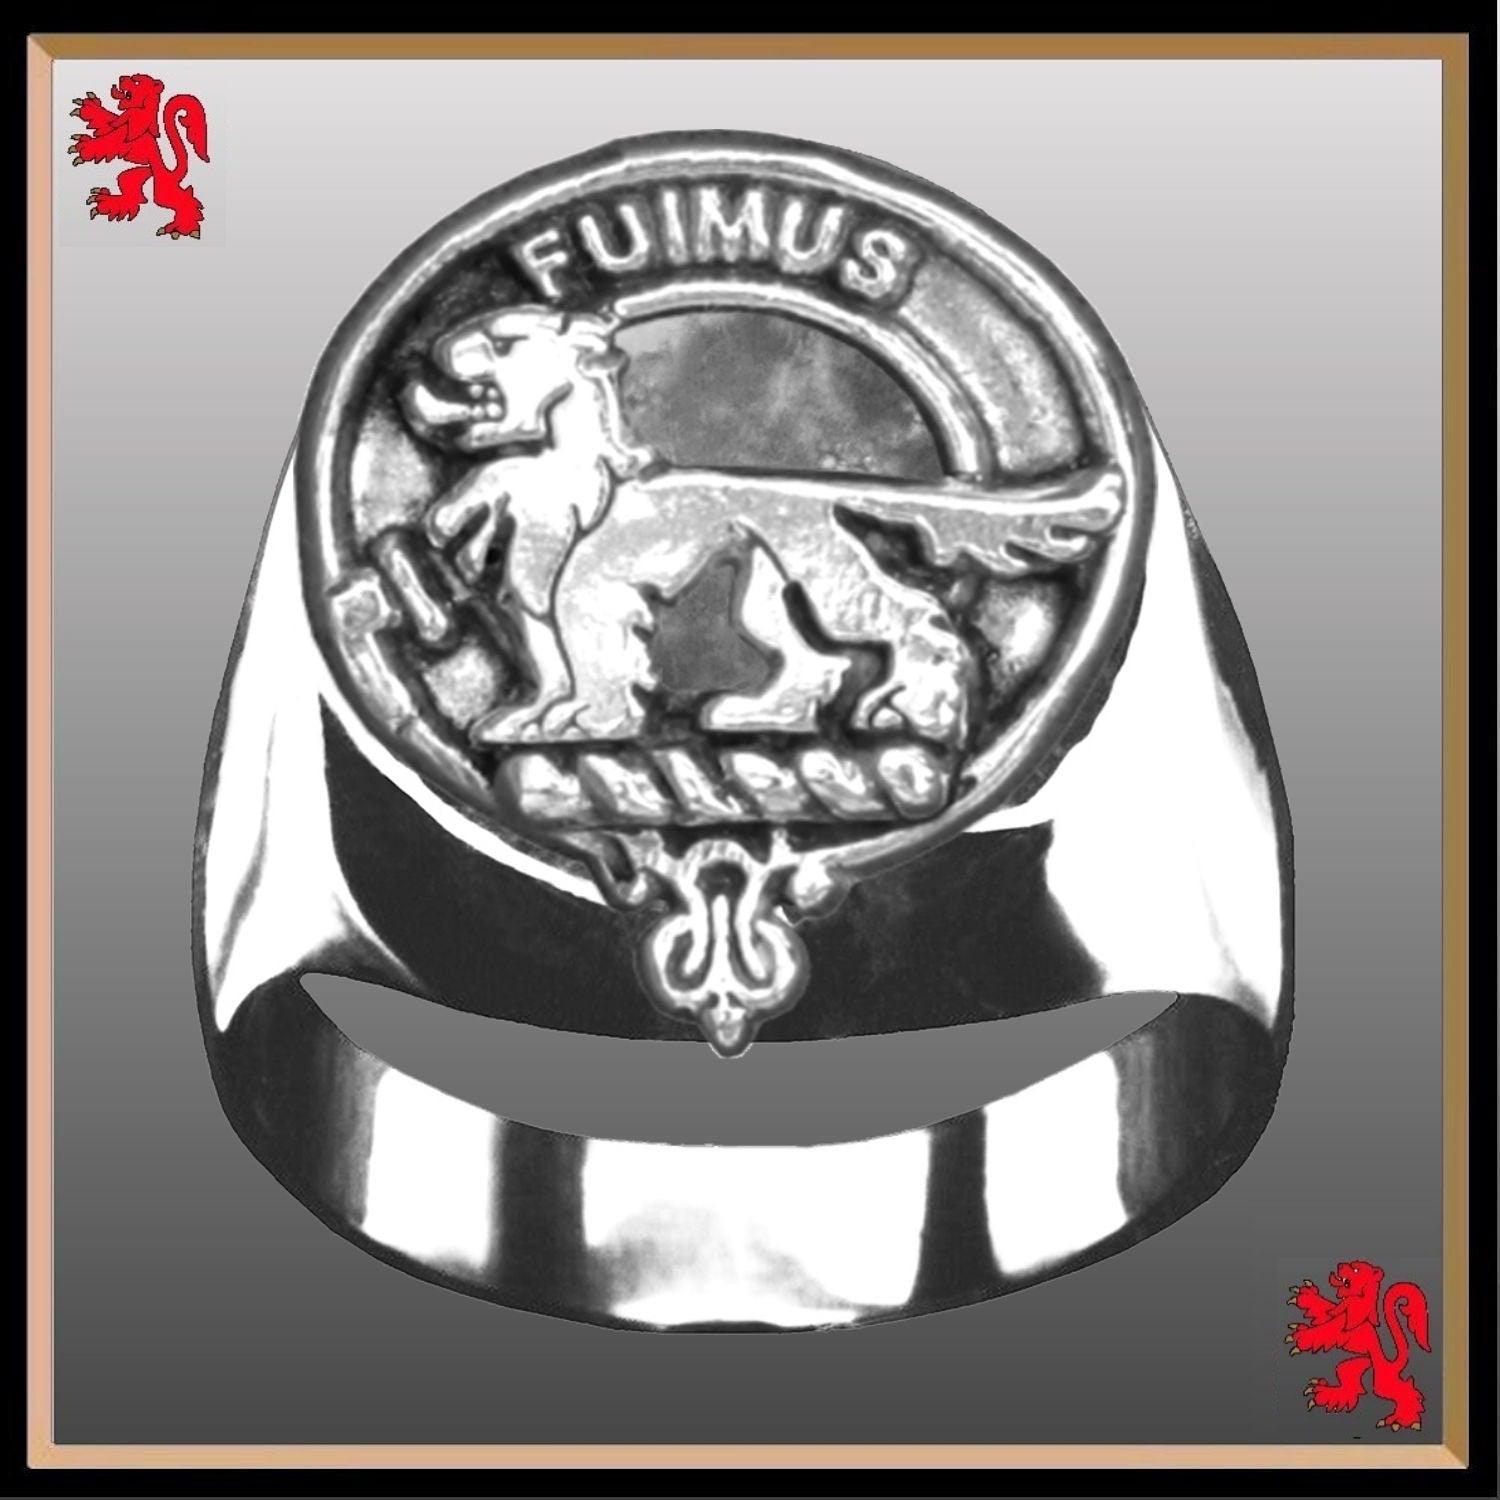 Bruce Scottish Clan Crest Ring GC100  ~  Sterling Silver and Karat Gold